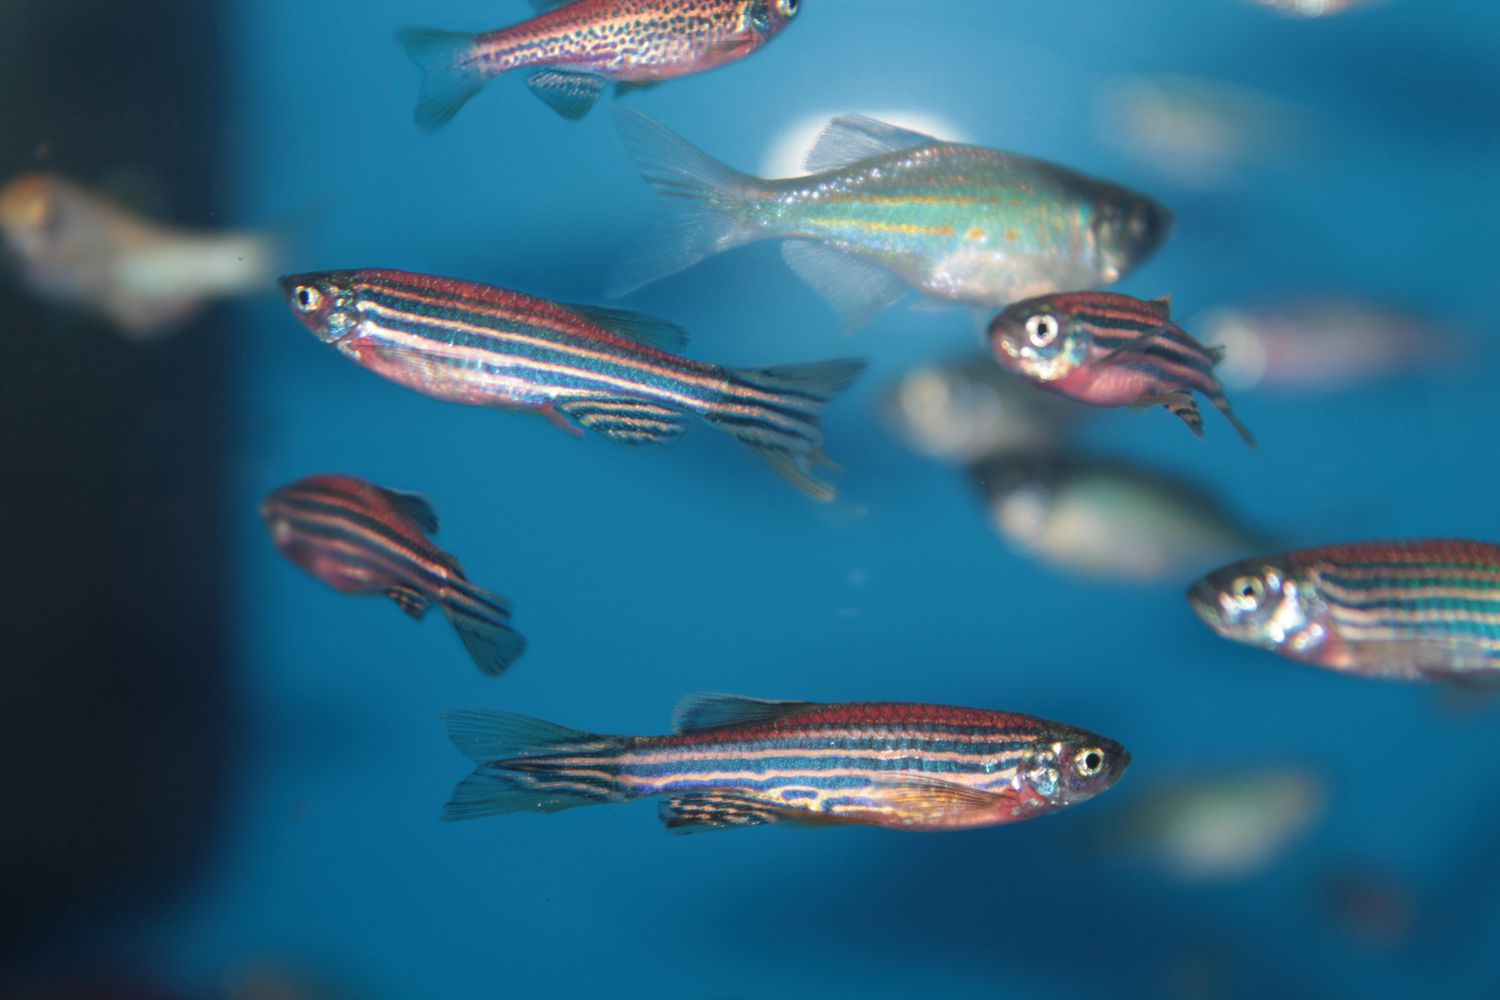 <strong><a href="https://news.utdallas.edu/campus-community/zebrafish-institute-2021/">Inspiring teachers to conduct zebrafish experiments</a></strong>